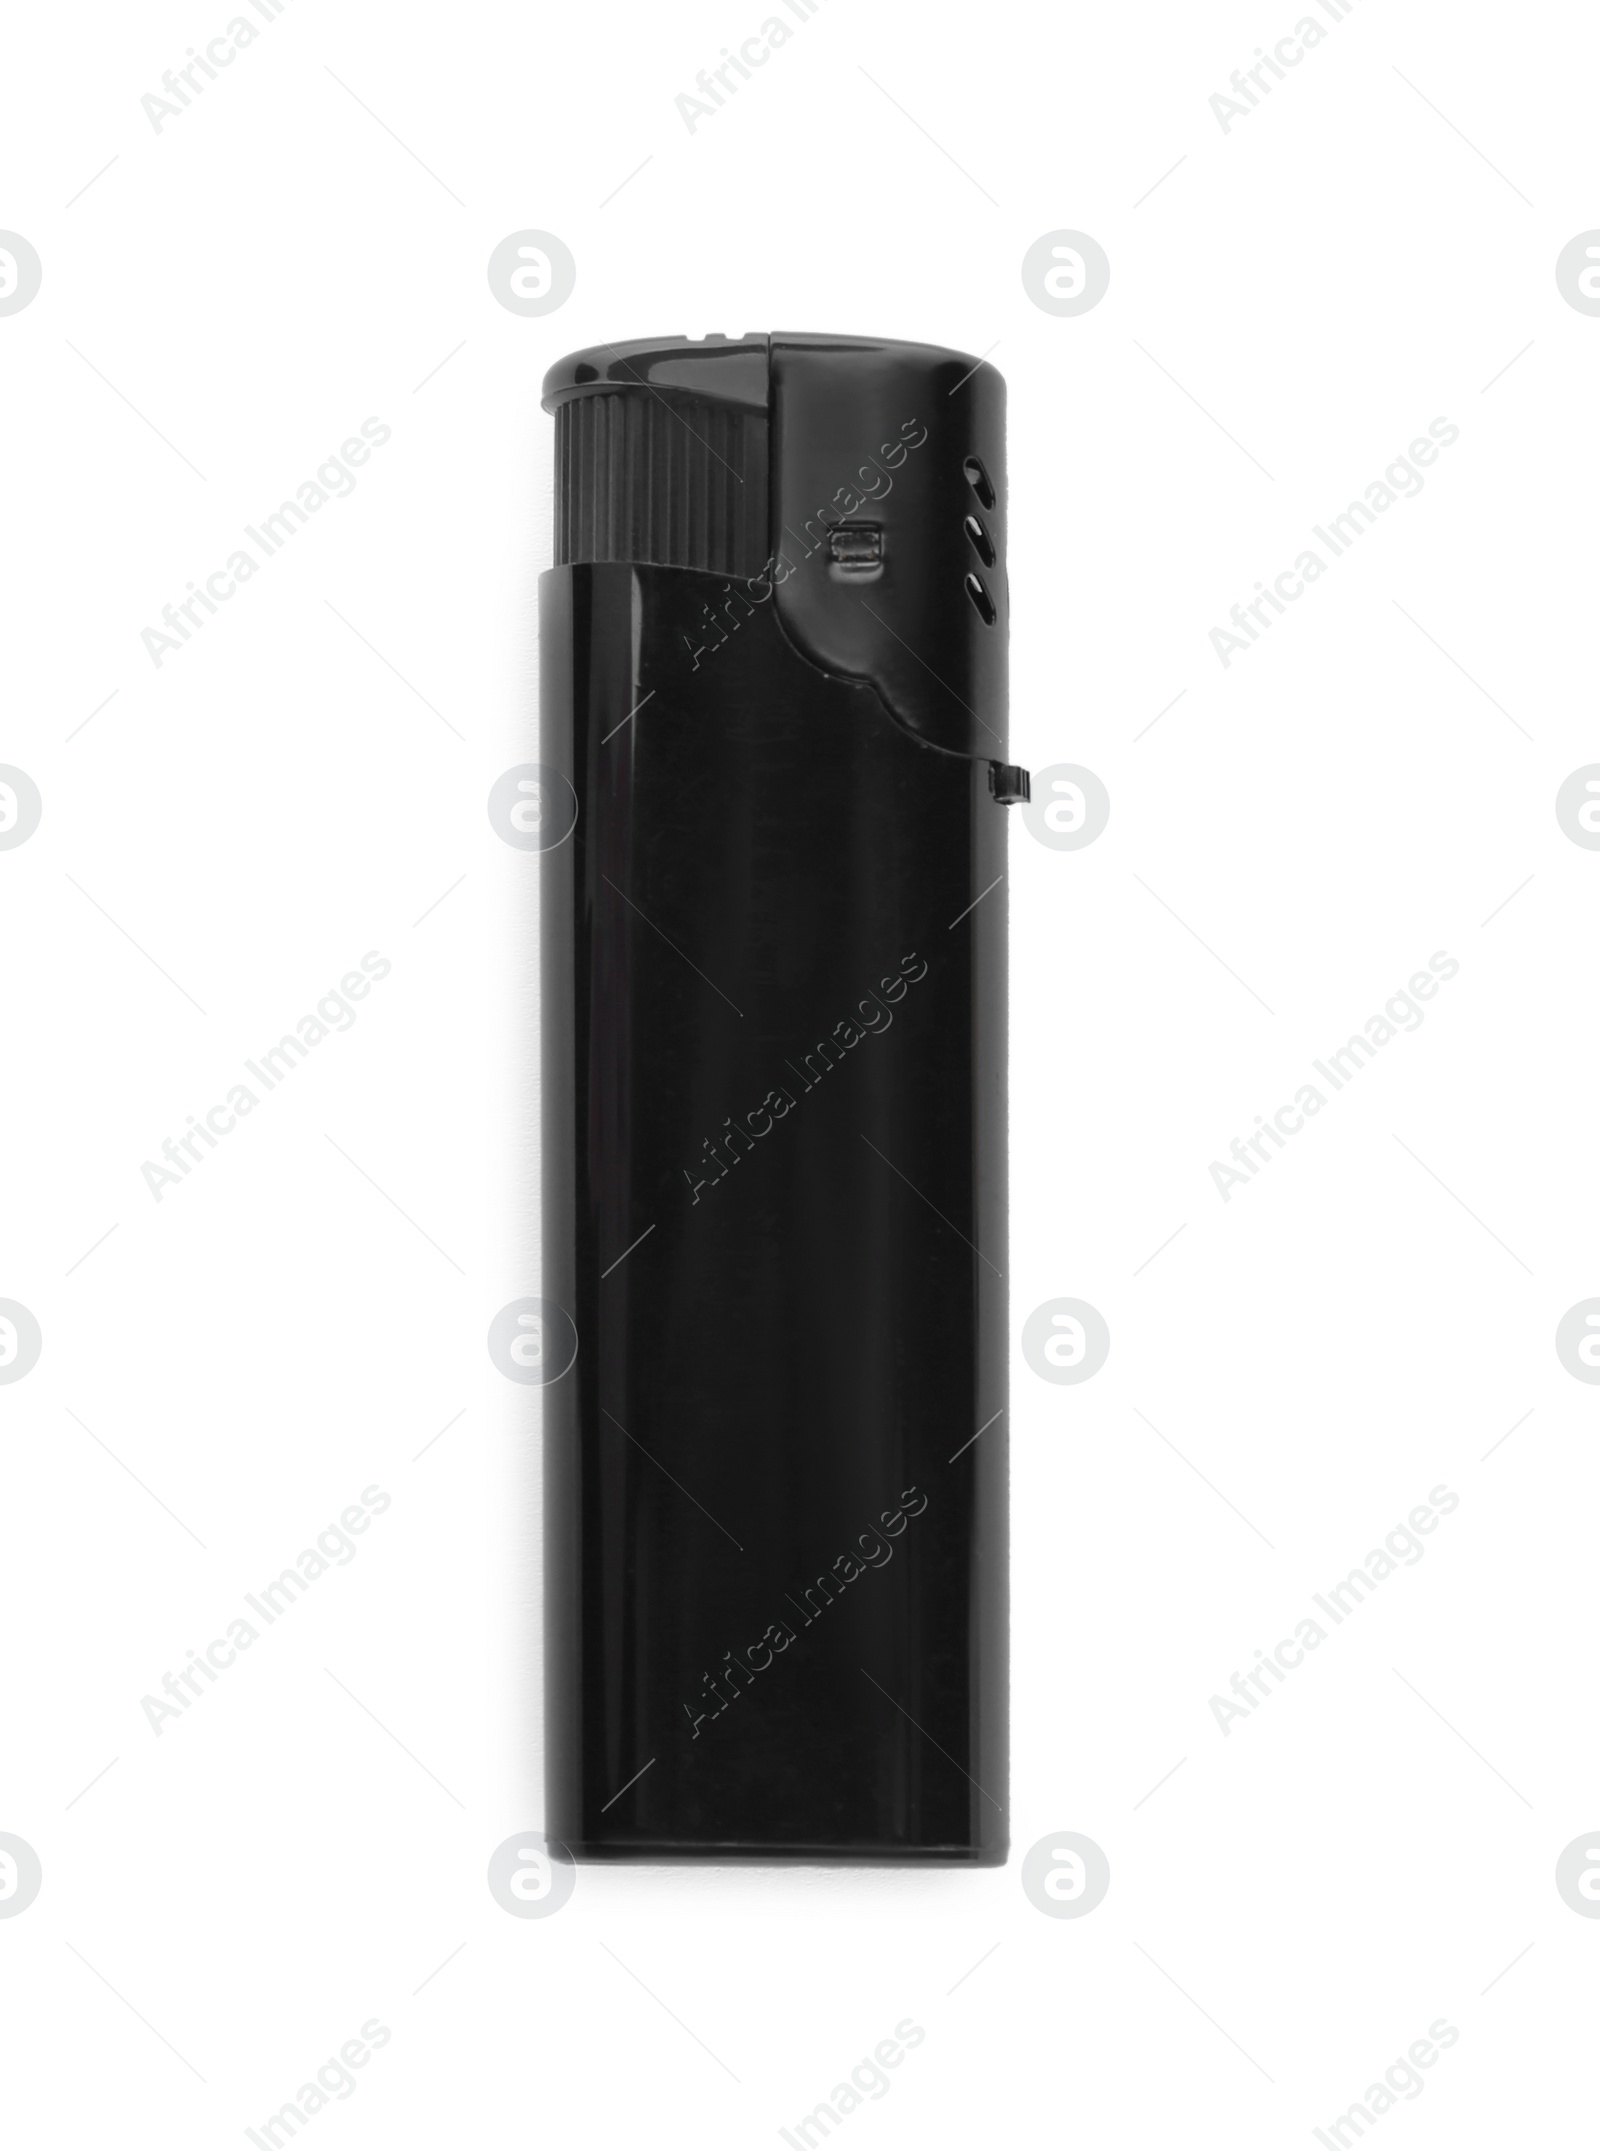 Photo of Stylish small pocket lighter isolated on white, top view